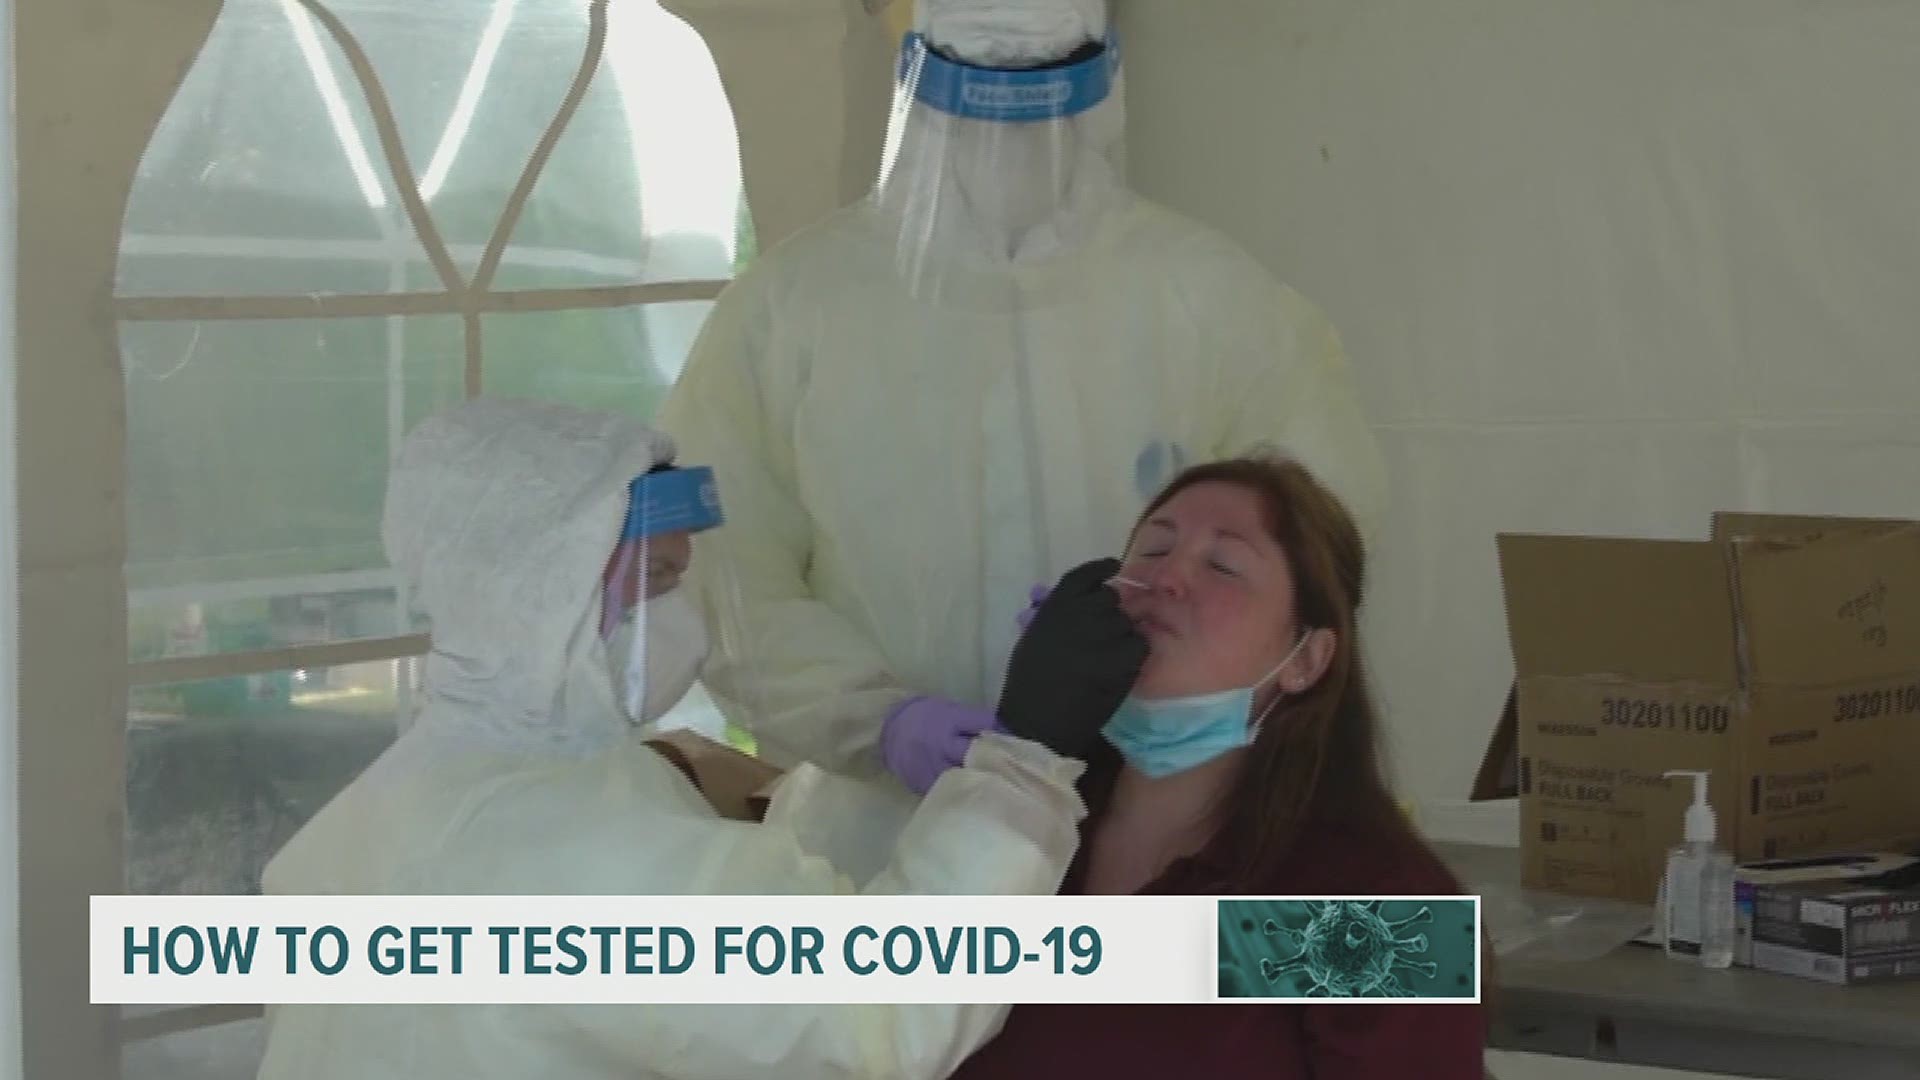 There are multiple ways to gets a COVID-19 test across the region